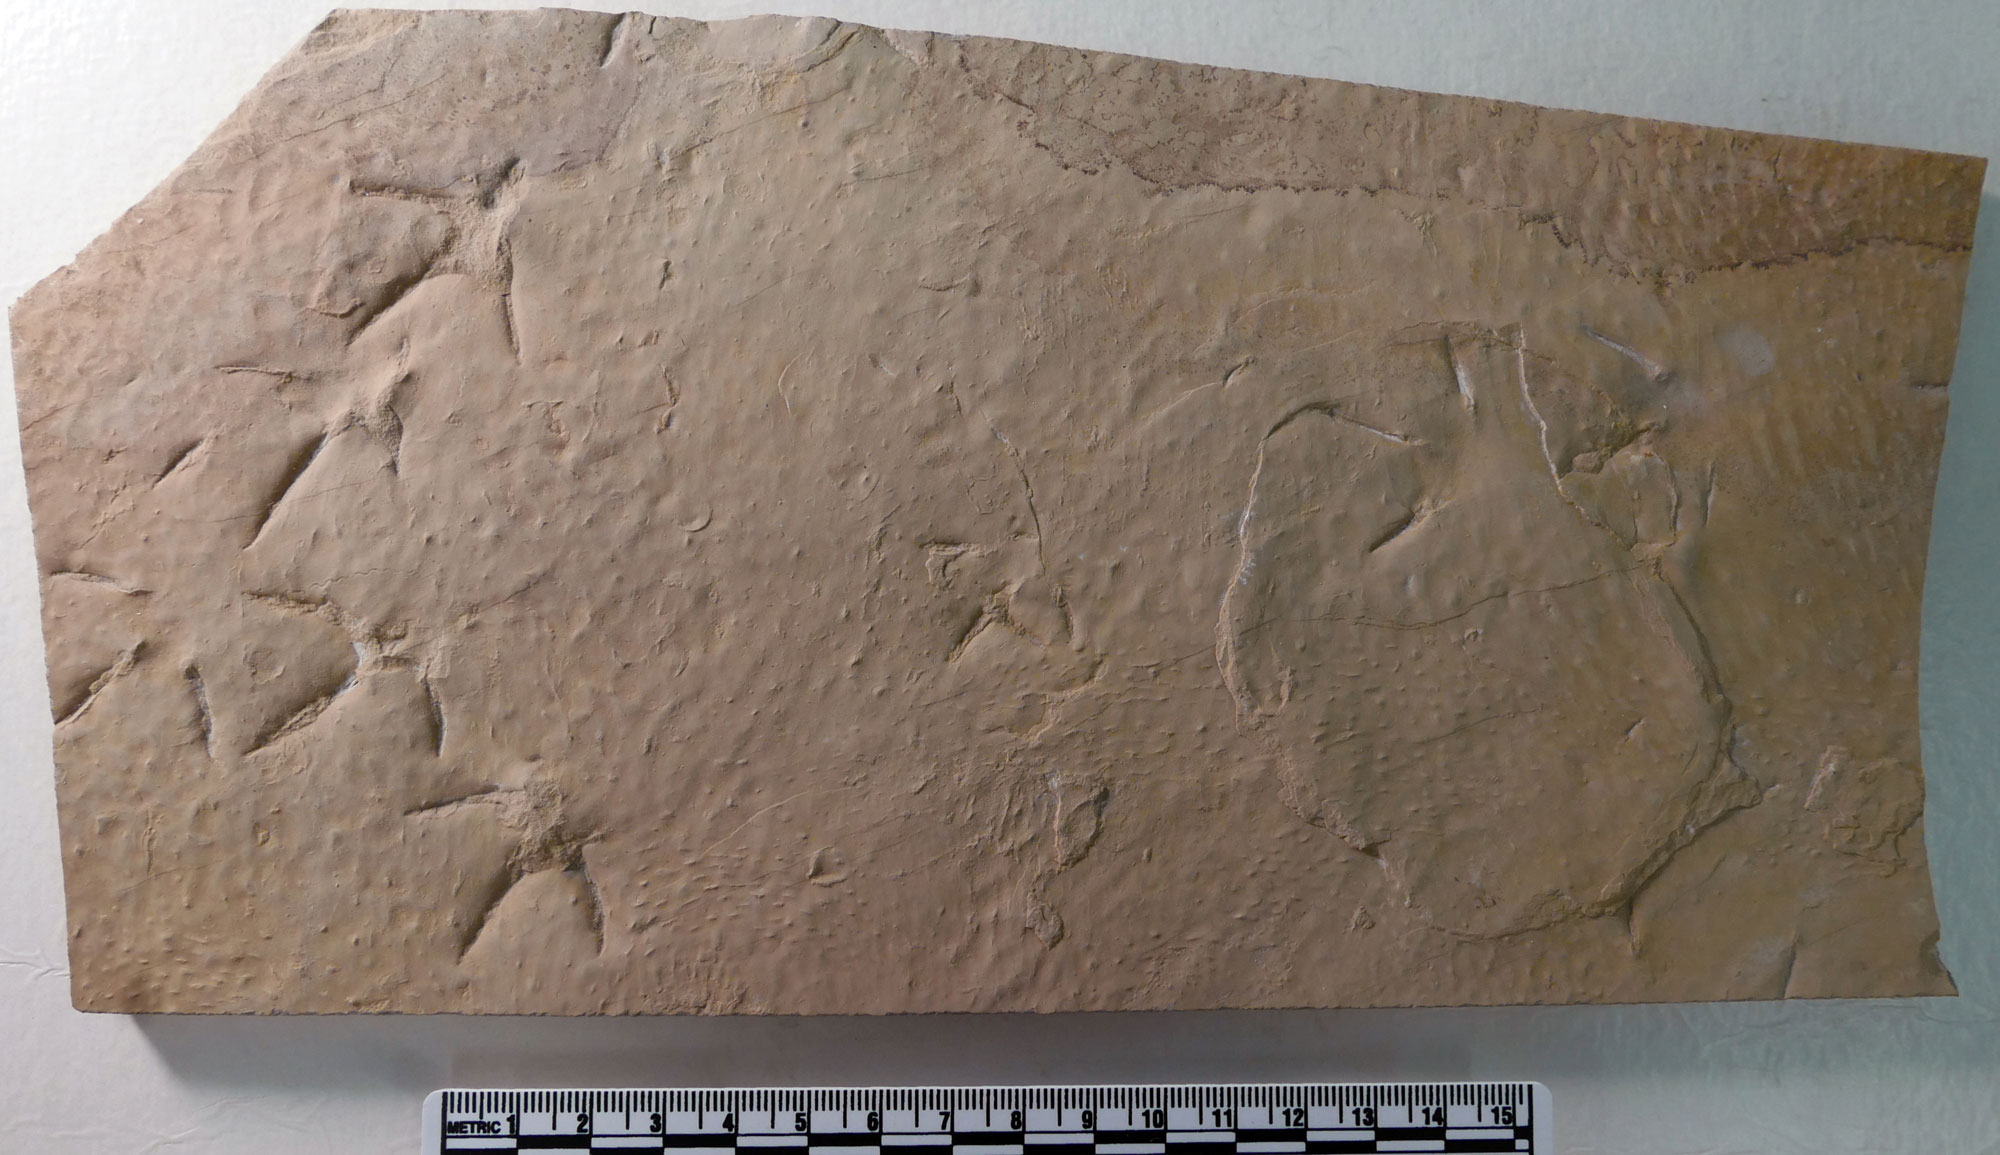 Photograph of a slab of rock from the Eocene Green River Formation of Utah. The rock is beige or light brown in color with tracks of a bird (impressions of three-toed feet).